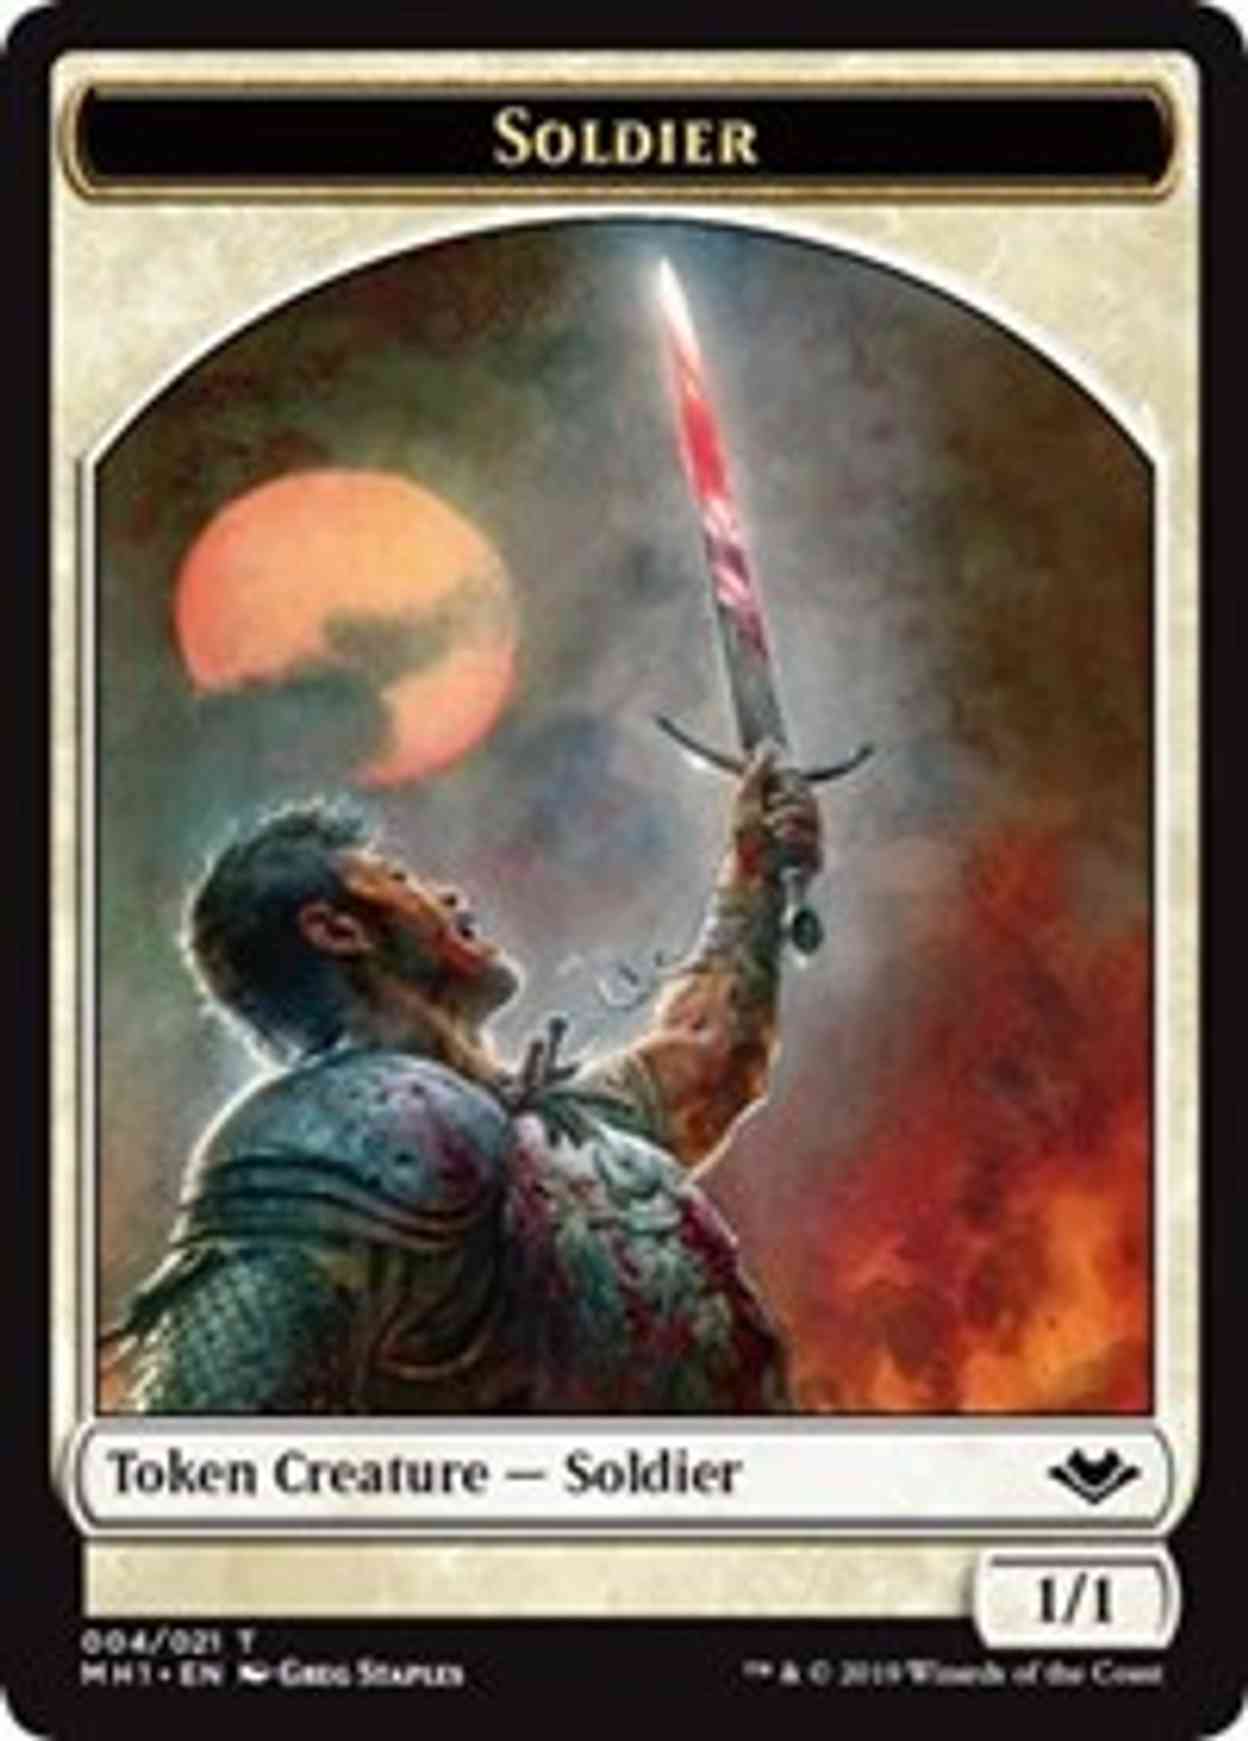 Soldier (004) // Rhino (013) Double-sided Token magic card front